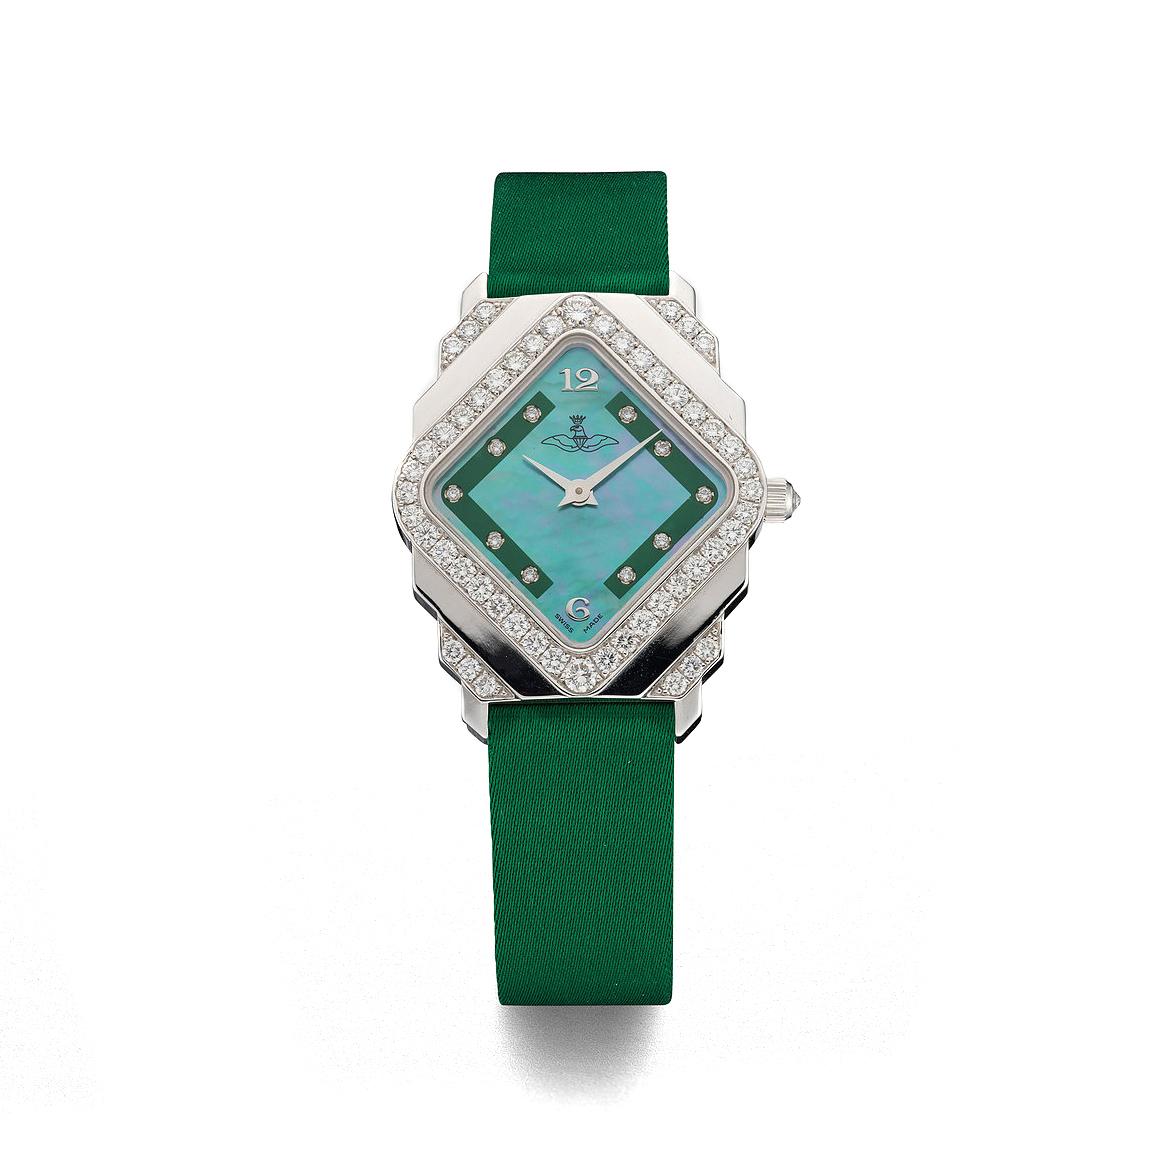 Wristwatch in 18kt white gold green mother of pearl green zone setwith 10 diamonds 0.05 cts bezel and attache set with 52 diamonds1.43 cts prong buckle alligator strap quartz movement.